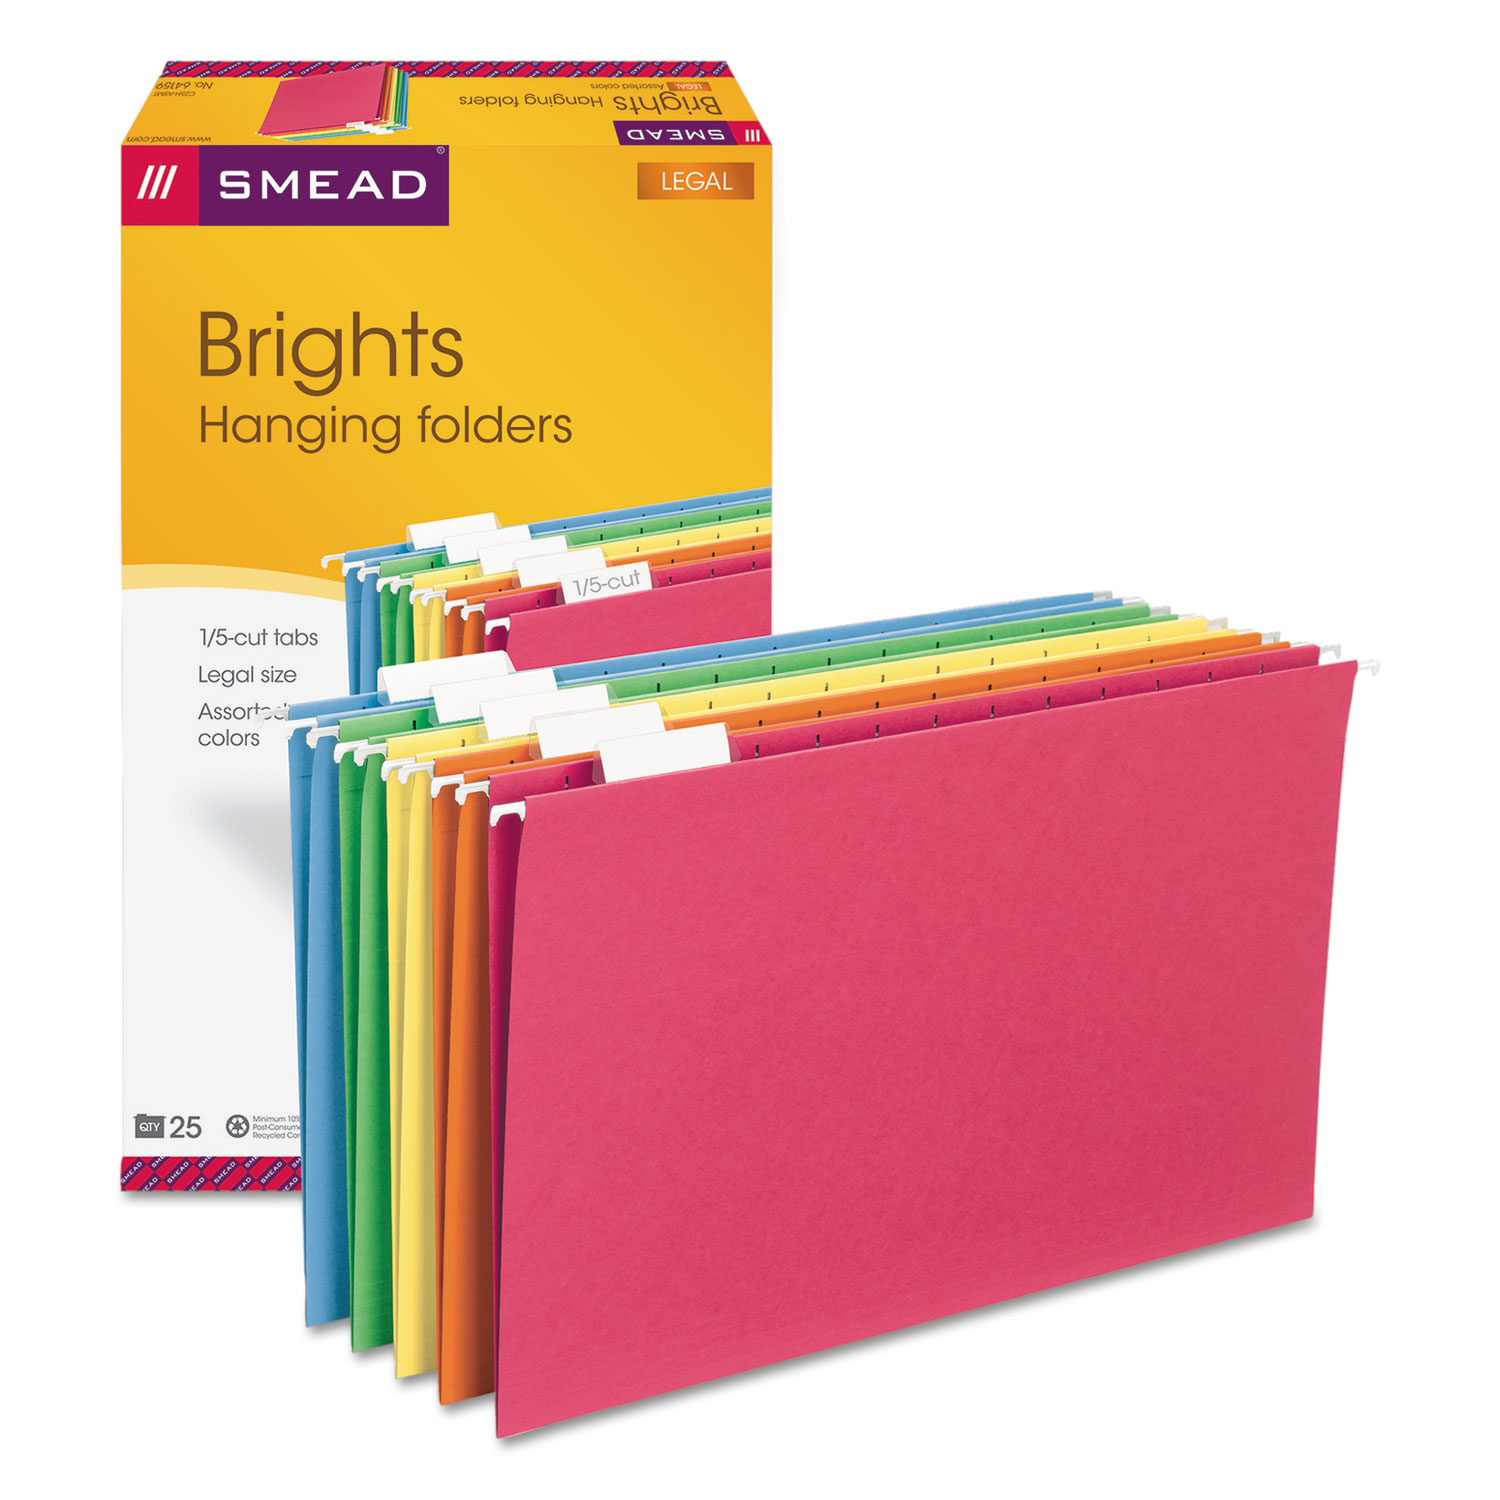 Details about   Pendaflex Recycled Hanging Folders 25/Bx 1/5 Cut Assorted Colors Legal Size 